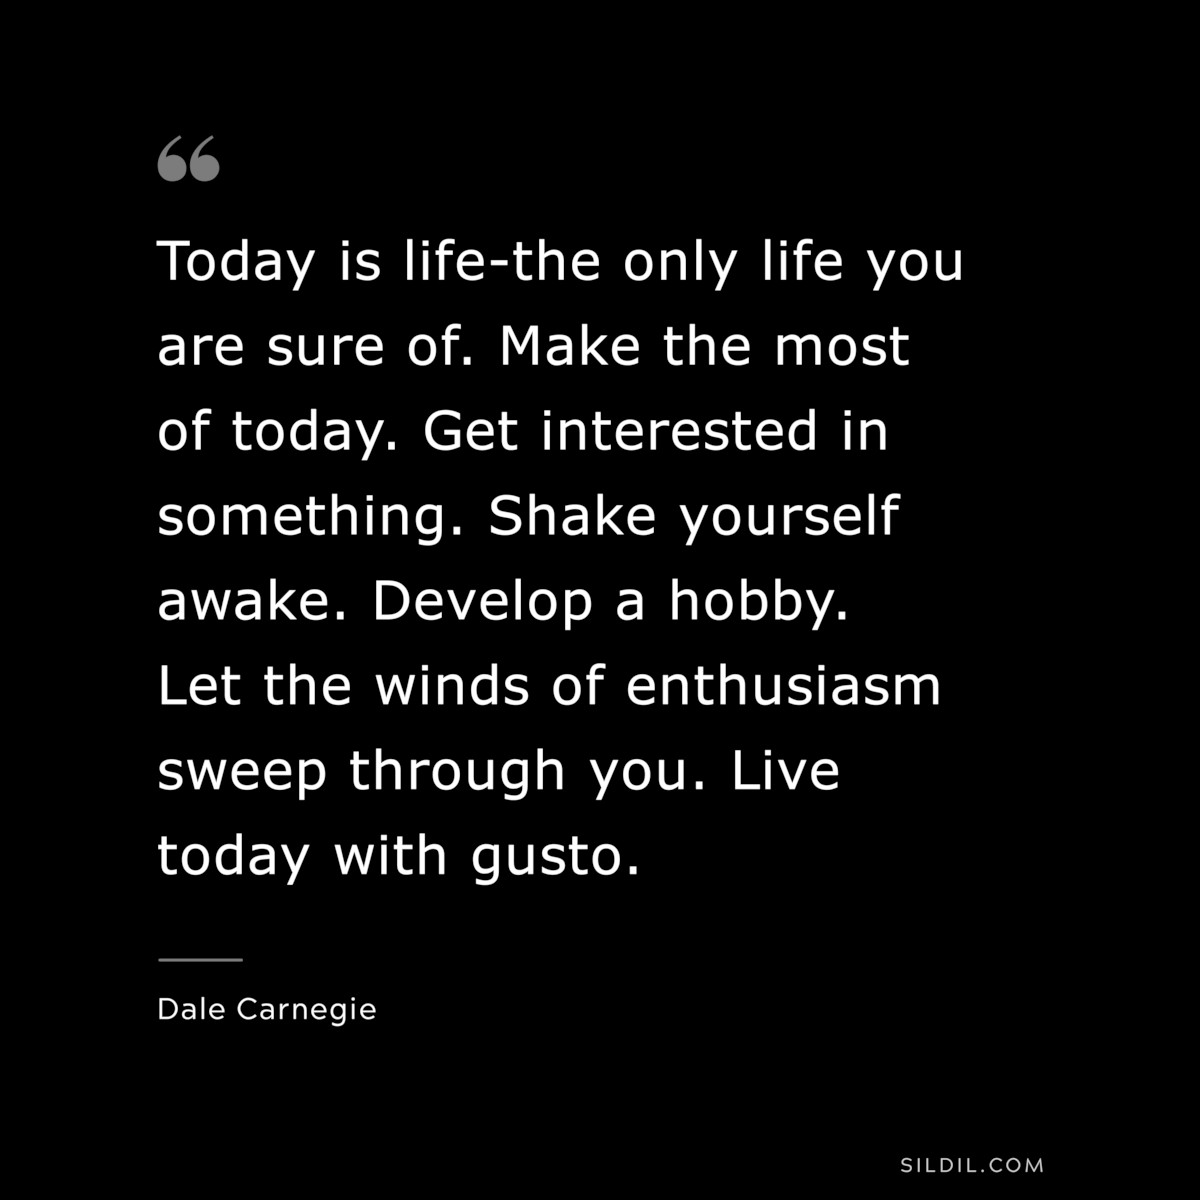 Today is life-the only life you are sure of. Make the most of today. Get interested in something. Shake yourself awake. Develop a hobby. Let the winds of enthusiasm sweep through you. Live today with gusto.― Dale Carnegie